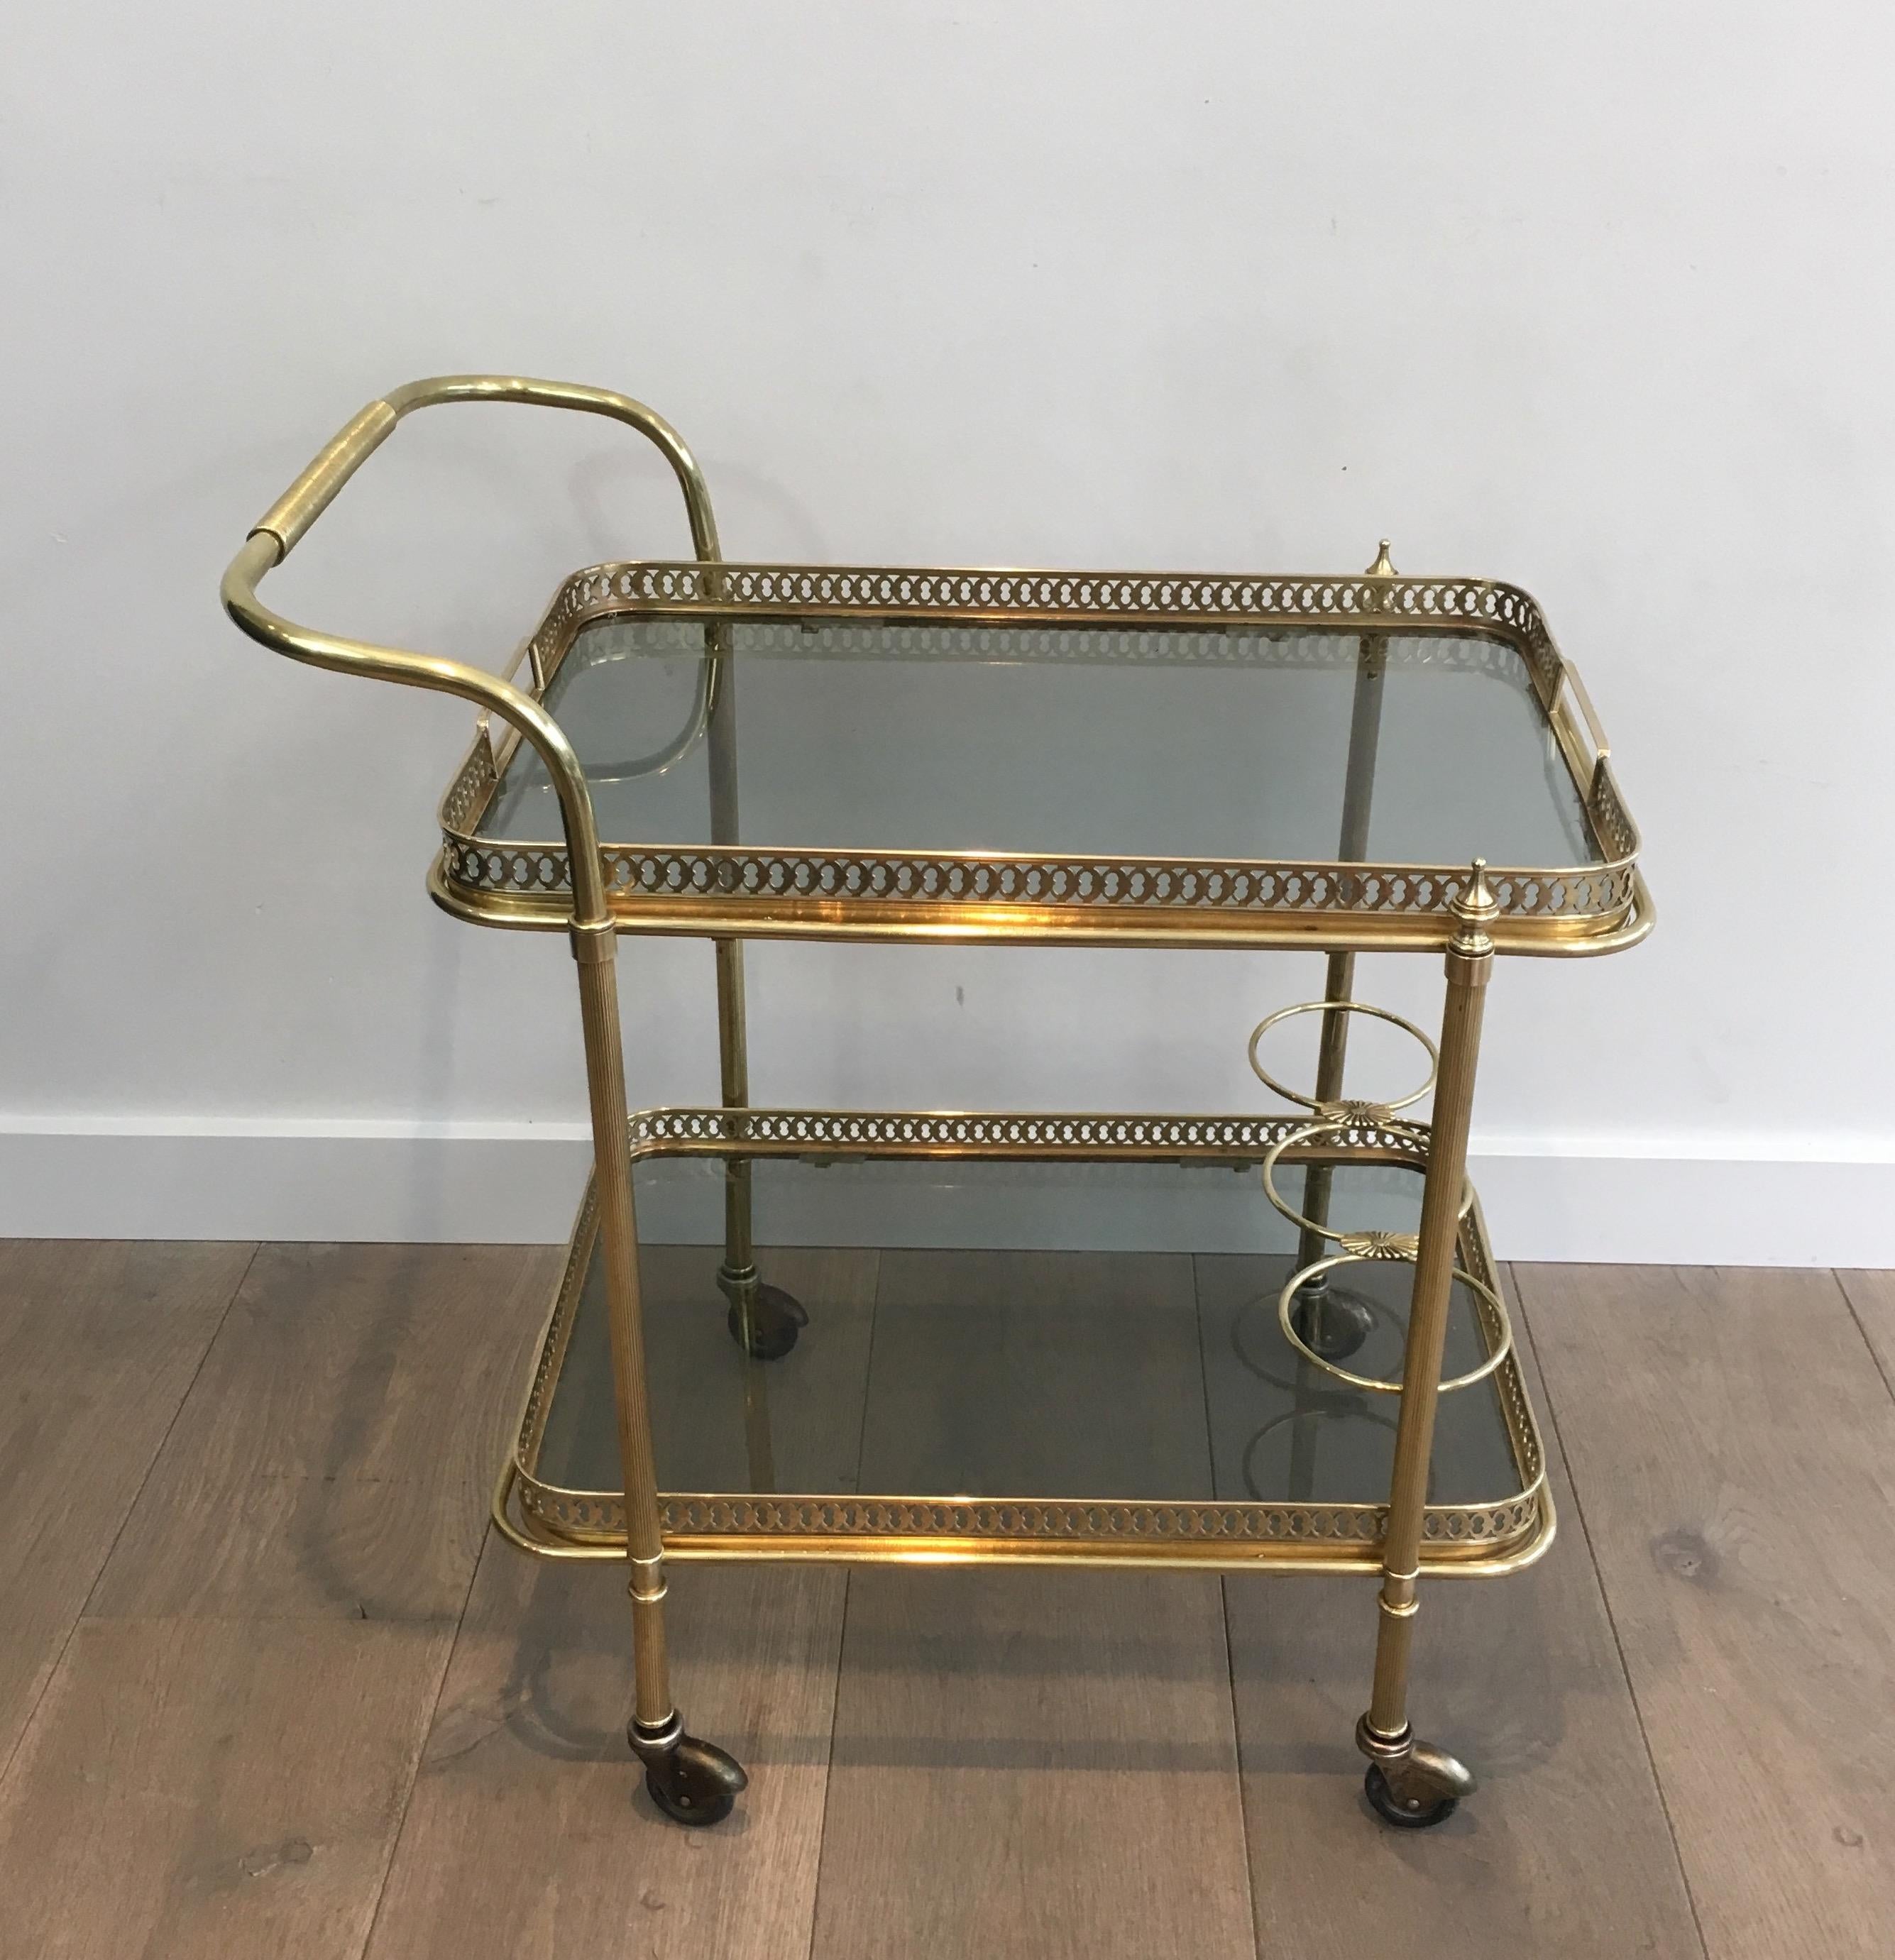 This neoclassical drinks trolley is made of brass with blueish glass shelves. This is a very Fine work of very good quality. This bar cart is in the style of famous French designer Maison Jansen, circa 1940.